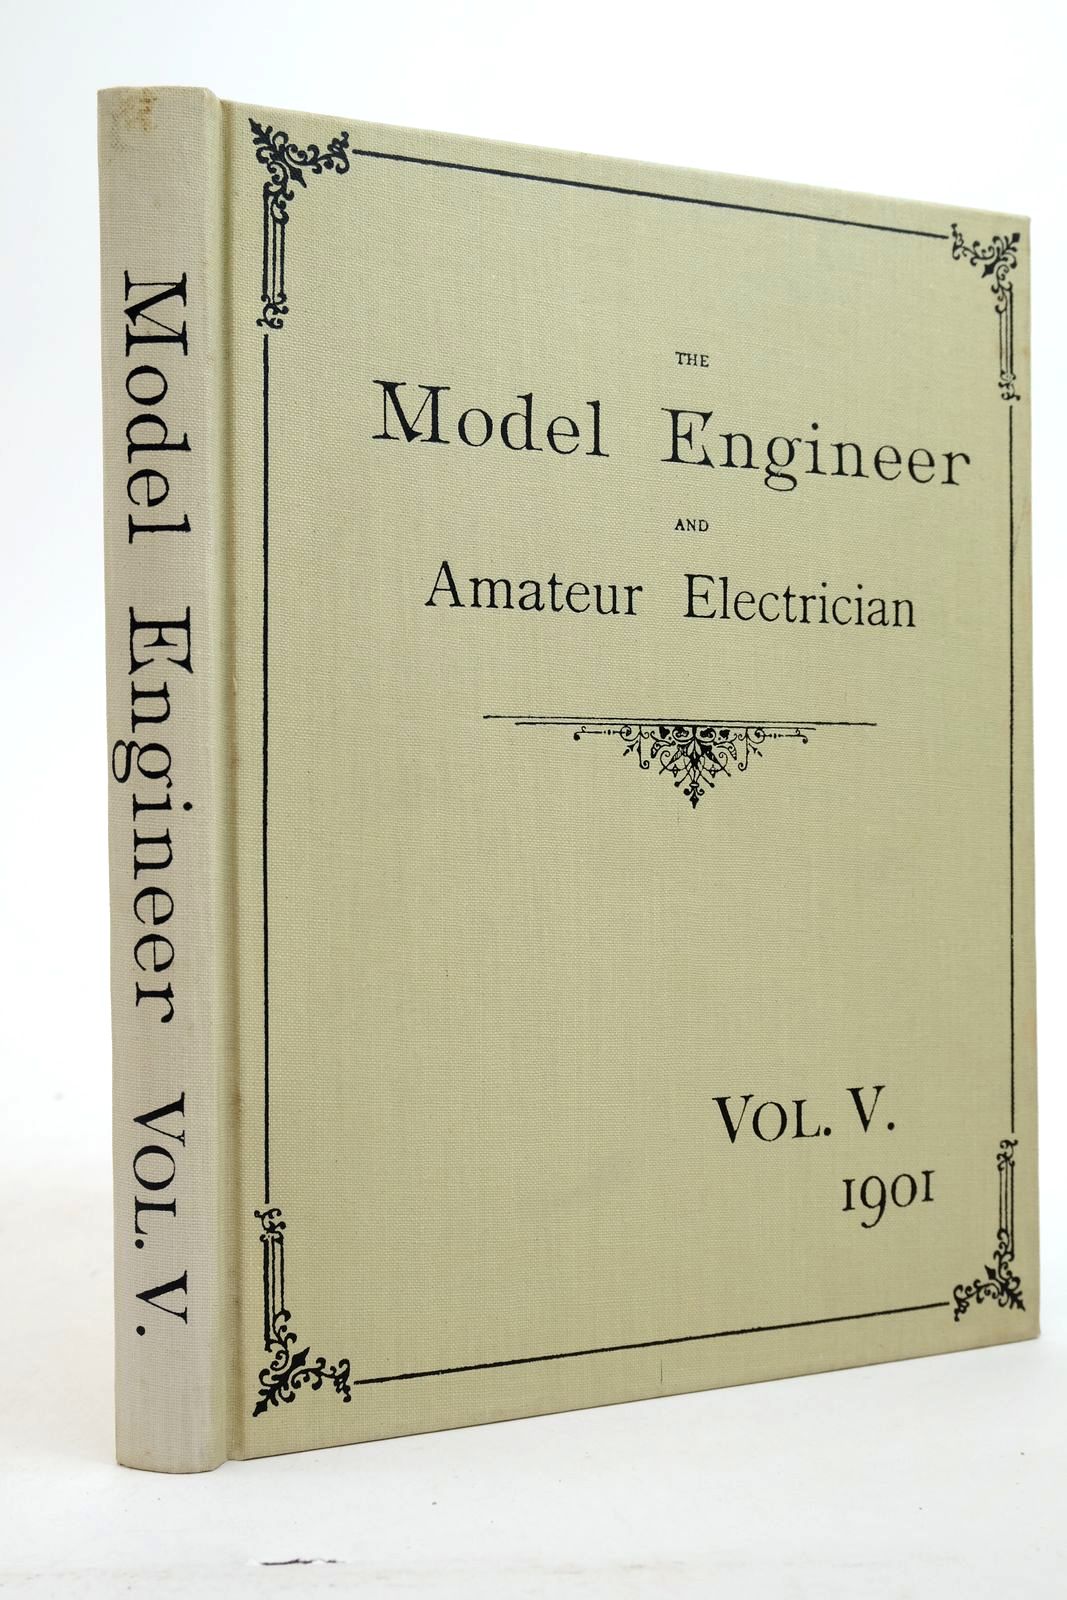 Photo of THE MODEL ENGINEER AND AMATEUR ELECTRICIAN VOL. V - 1901 written by Marshall, Percival published by Dawbarn & Ward Limited, Argus Books Ltd (STOCK CODE: 2139858)  for sale by Stella & Rose's Books